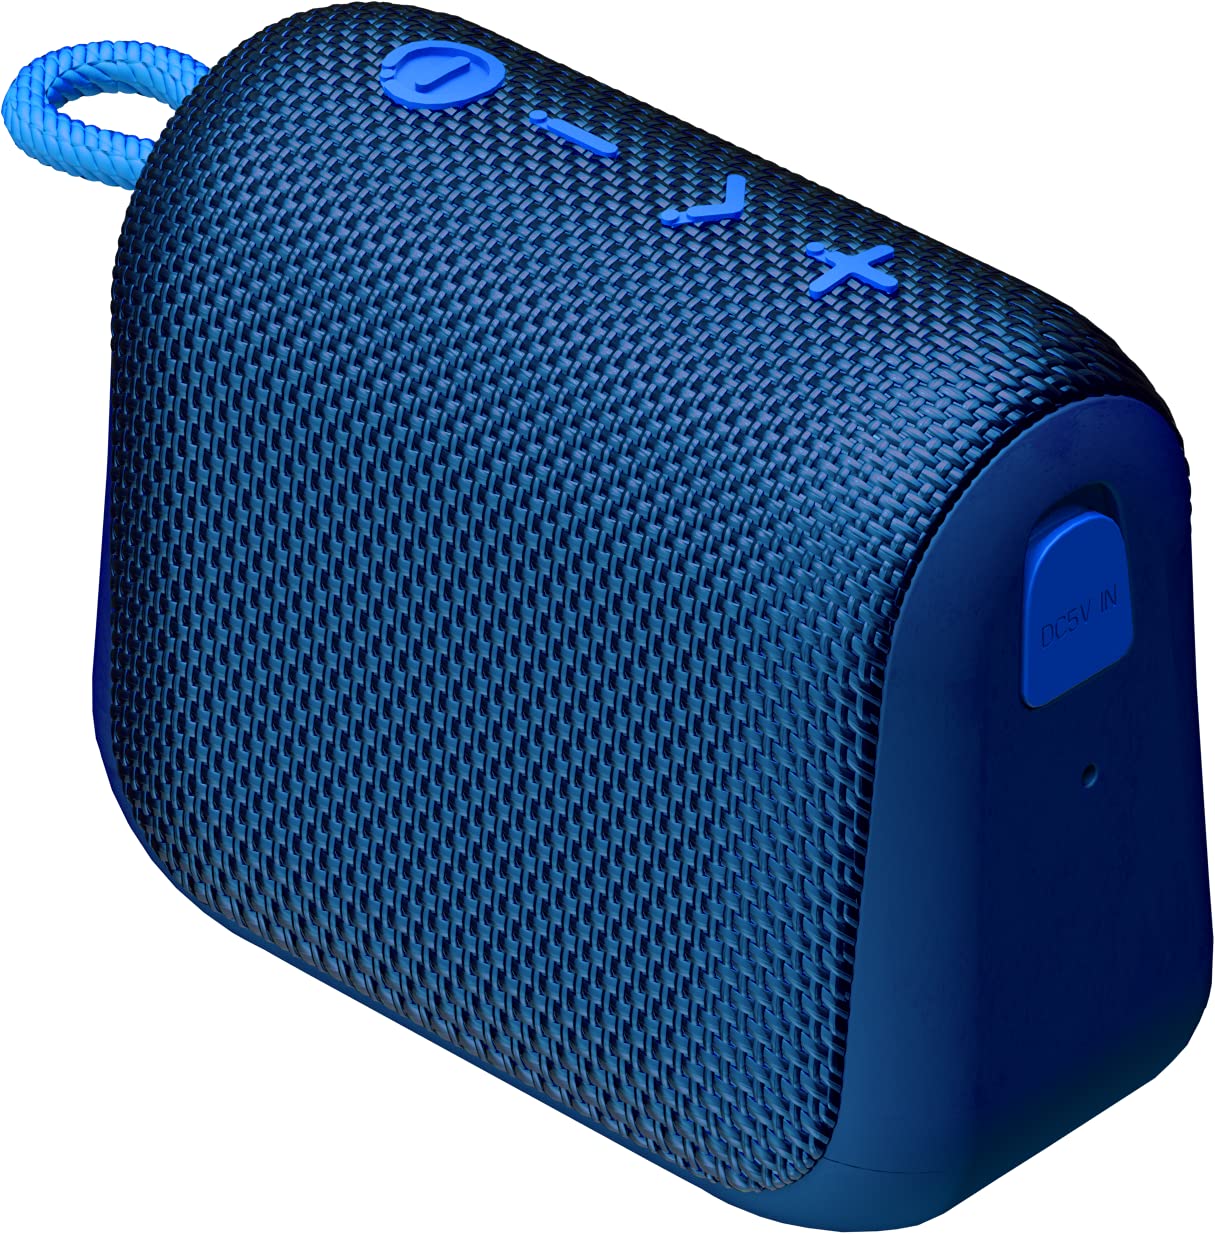 Raycon Everyday Speaker with Microphone IP67 Dustproof and Waterproof TWS Multilink Bluetooth 5.0 Portable Outdoor Wireless Speaker for Home, Outdoors, Travel (Electric Blue)